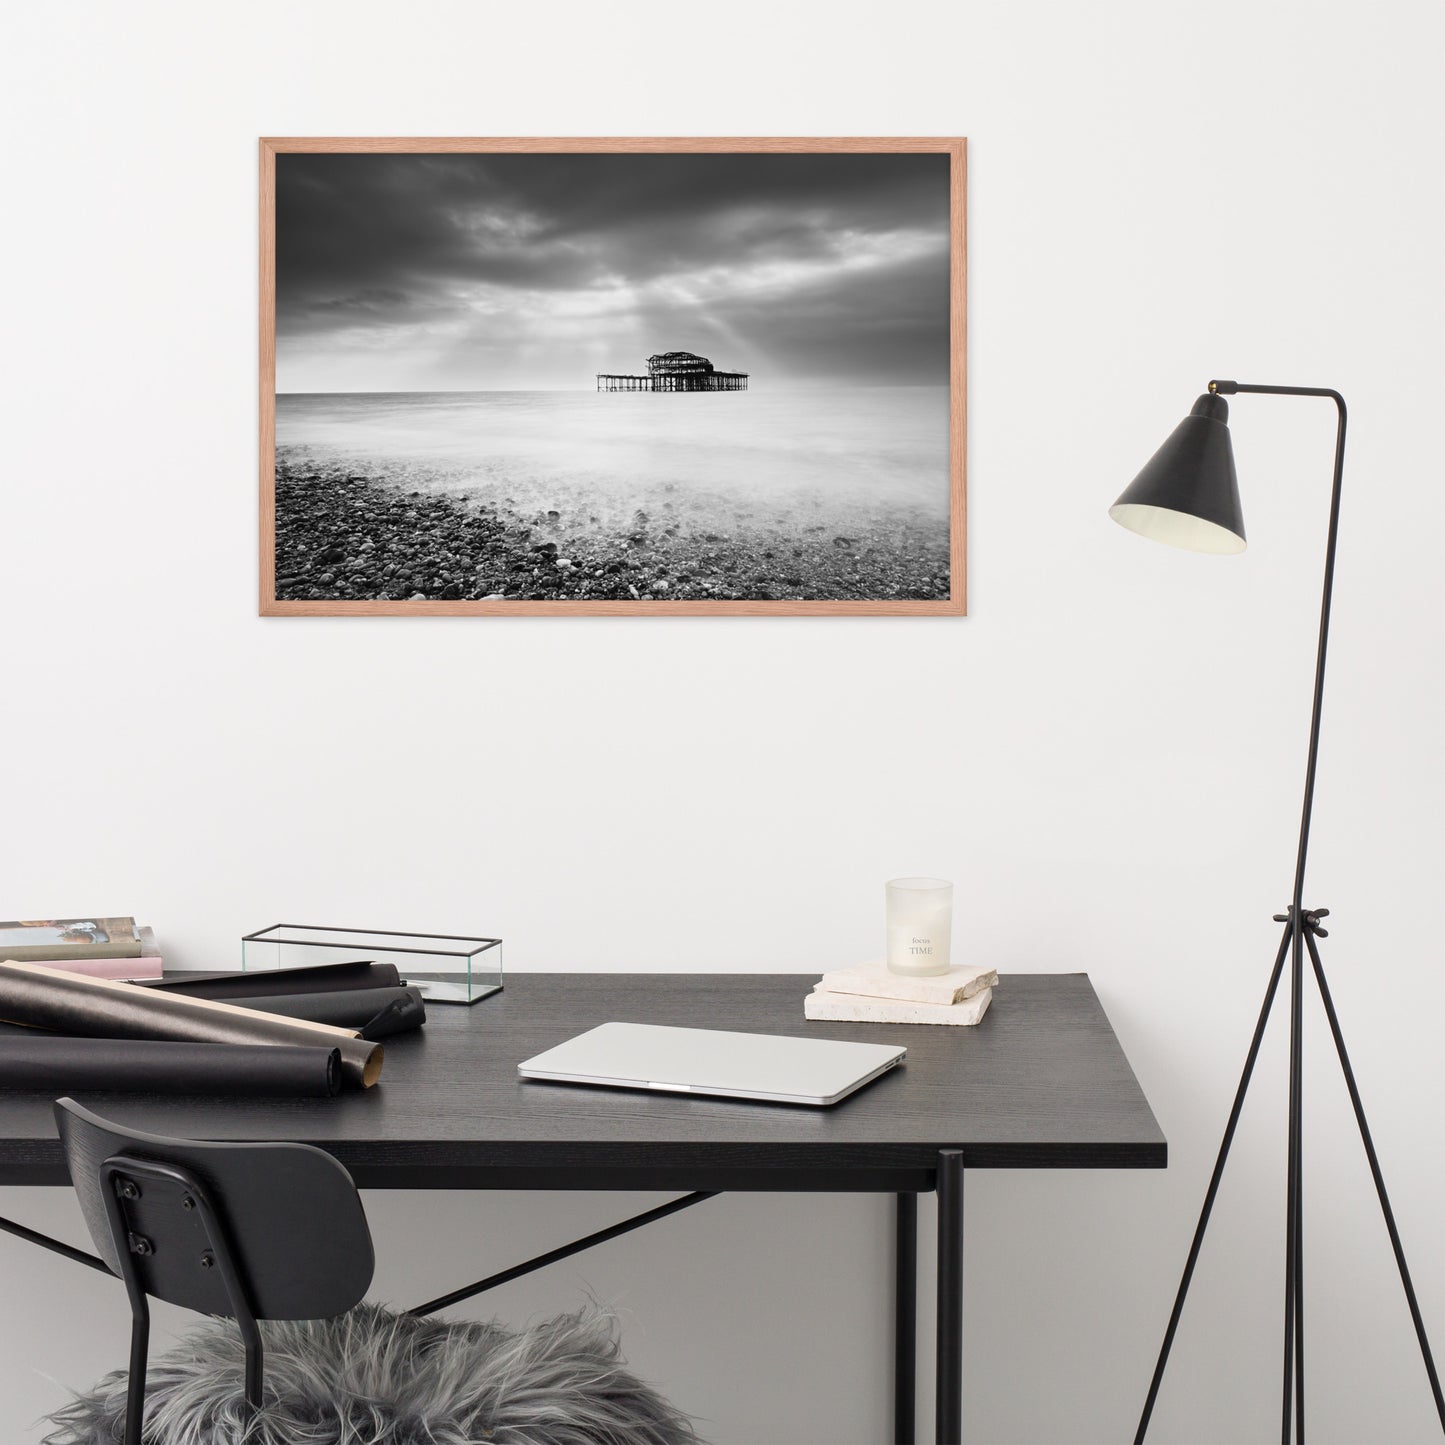 Best Office Wall Decor: Abandoned West Pier Coastal Seascape Landscape Black and White Photograph Framed Wall Art Print